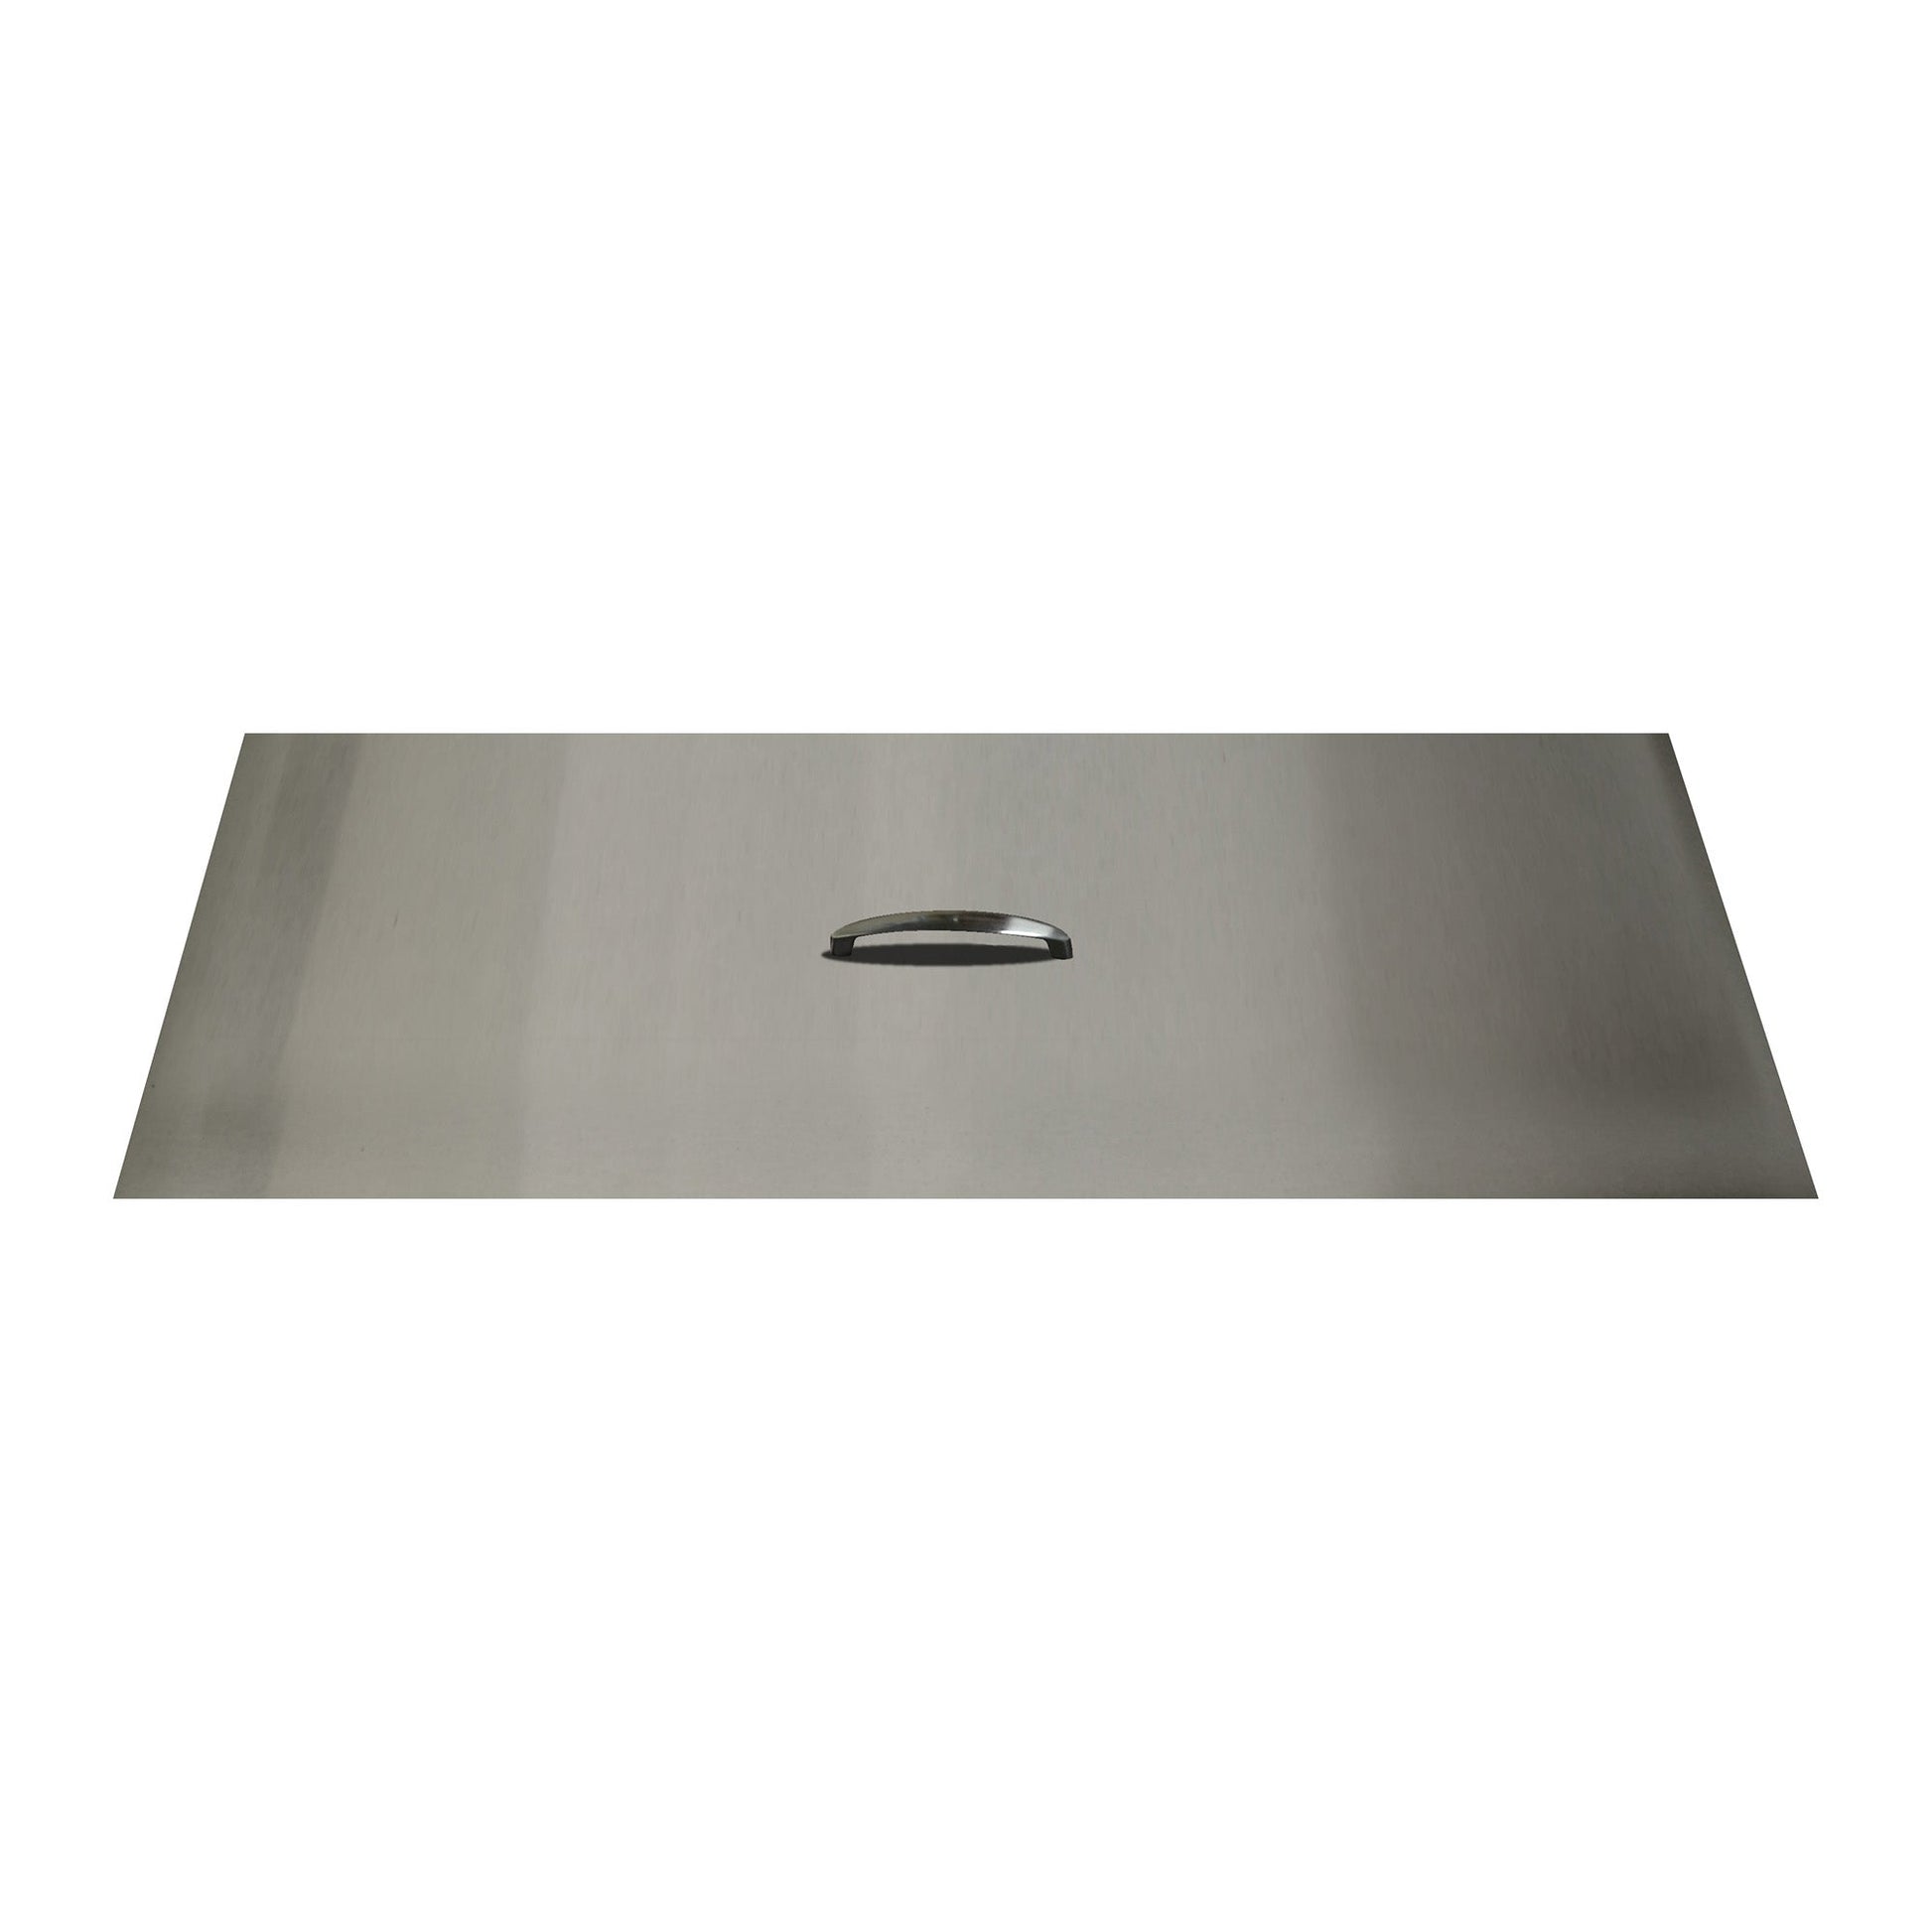 The Outdoor Plus 16" x 28" Stainless Steel Rectangular Fire Pit Lid Cover